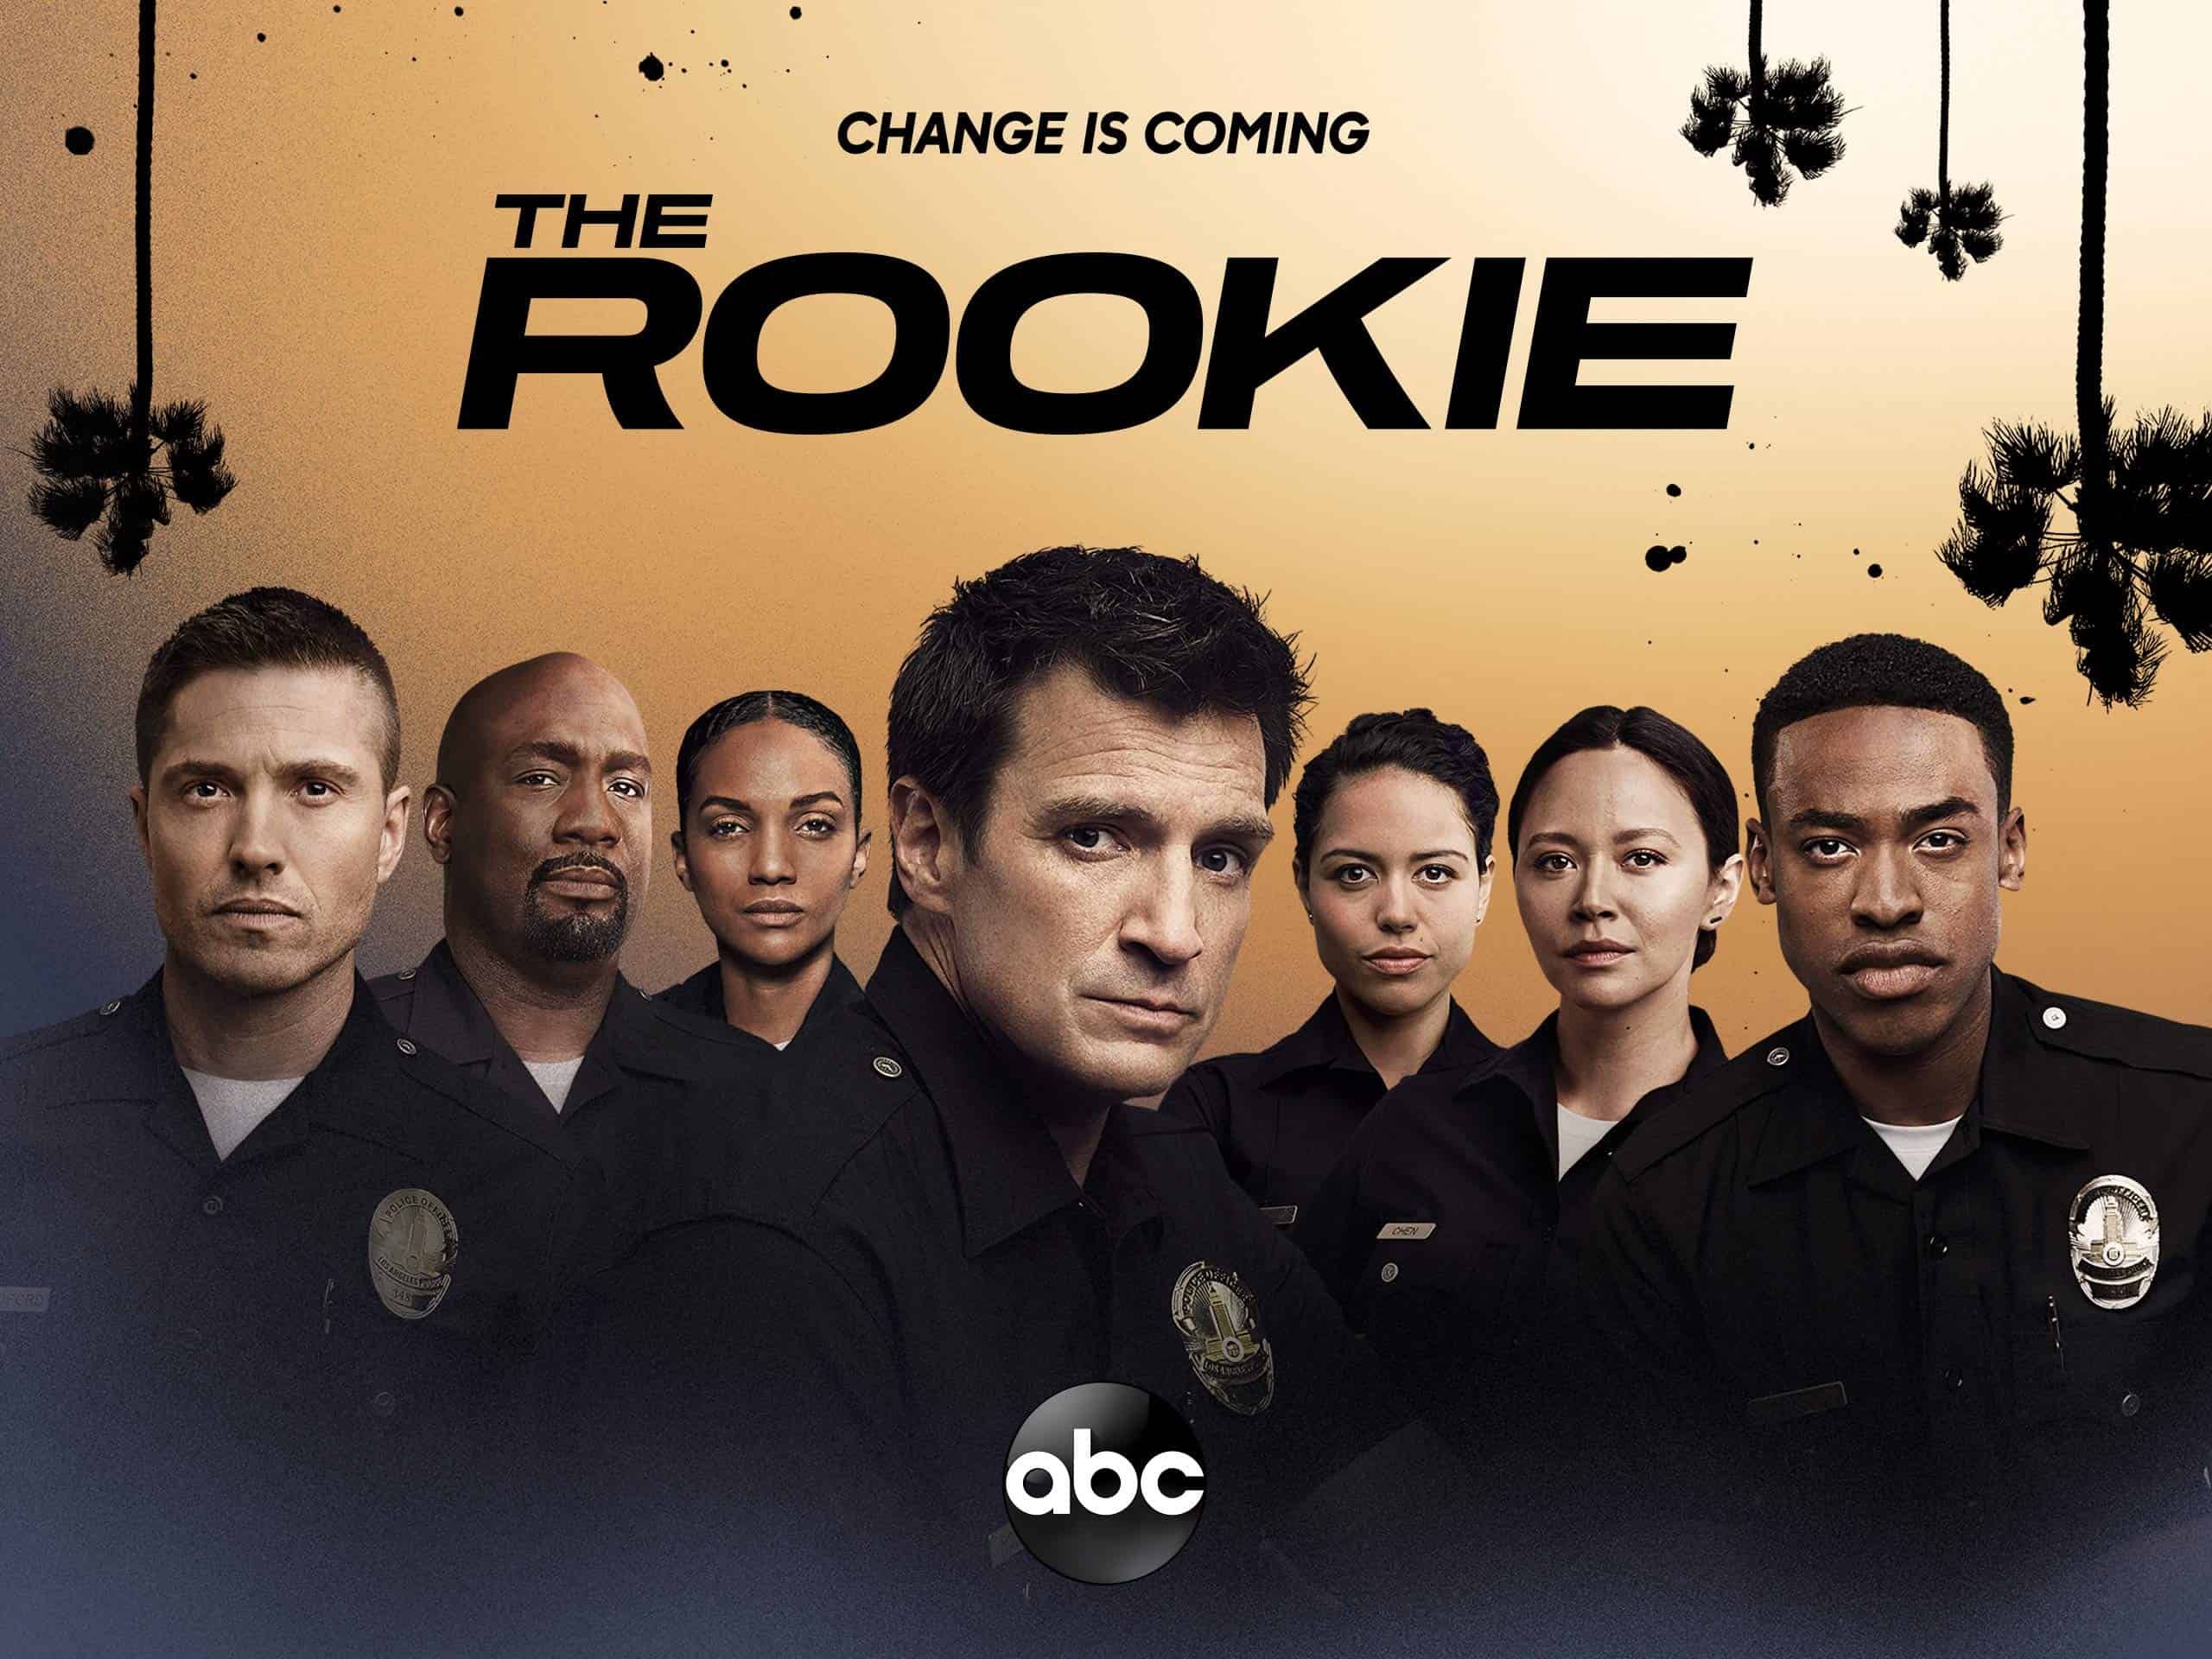 Cast of the show, The Rookie (Credits: ABC)